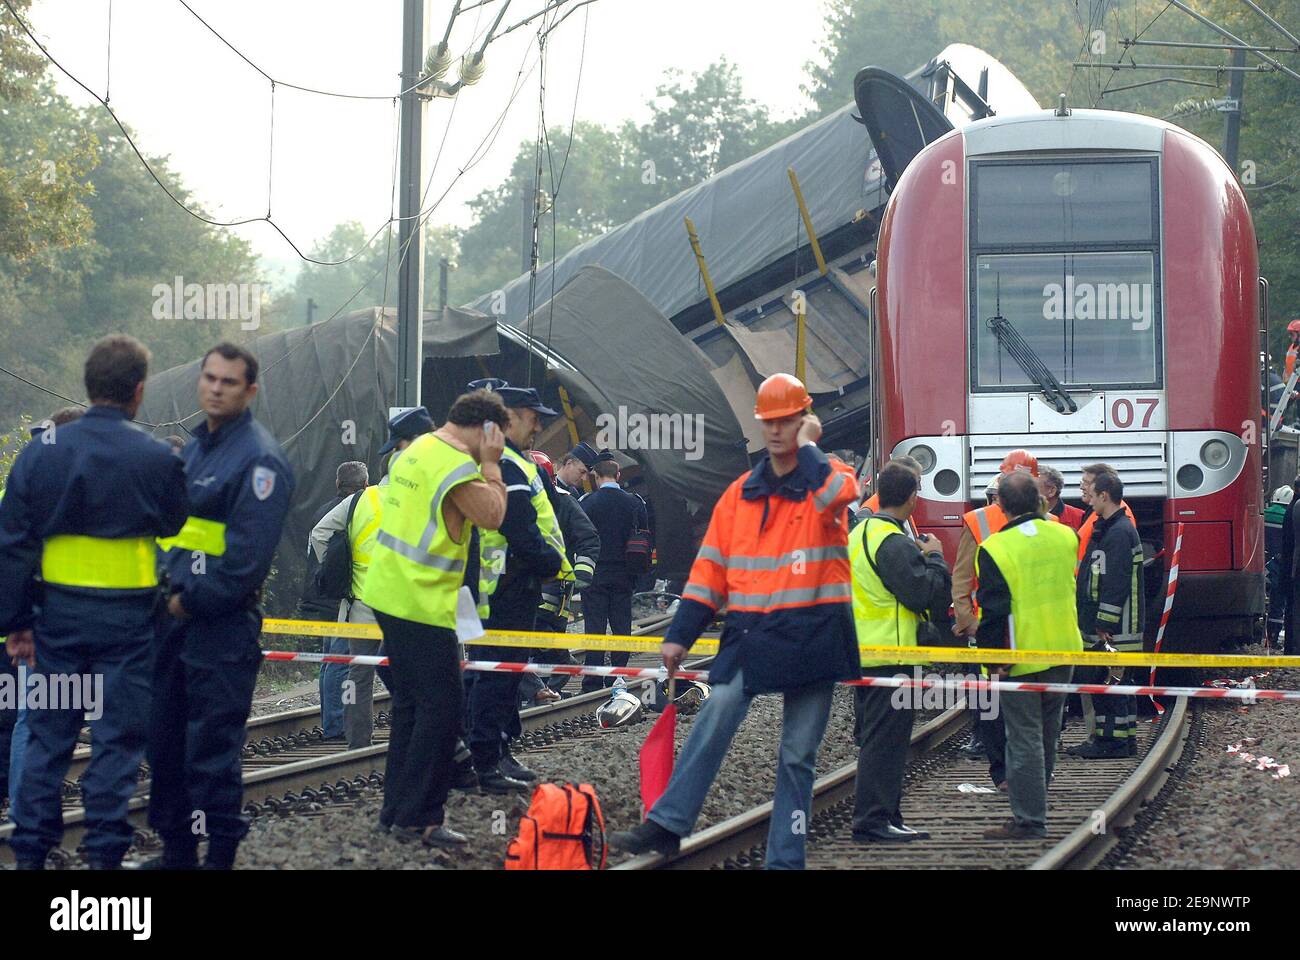 At least 5 people were killed and more than 20 injured people in a head-on  collision between a passenger train and a goods train in Zoufftgen, France  on October 11, 2006. The